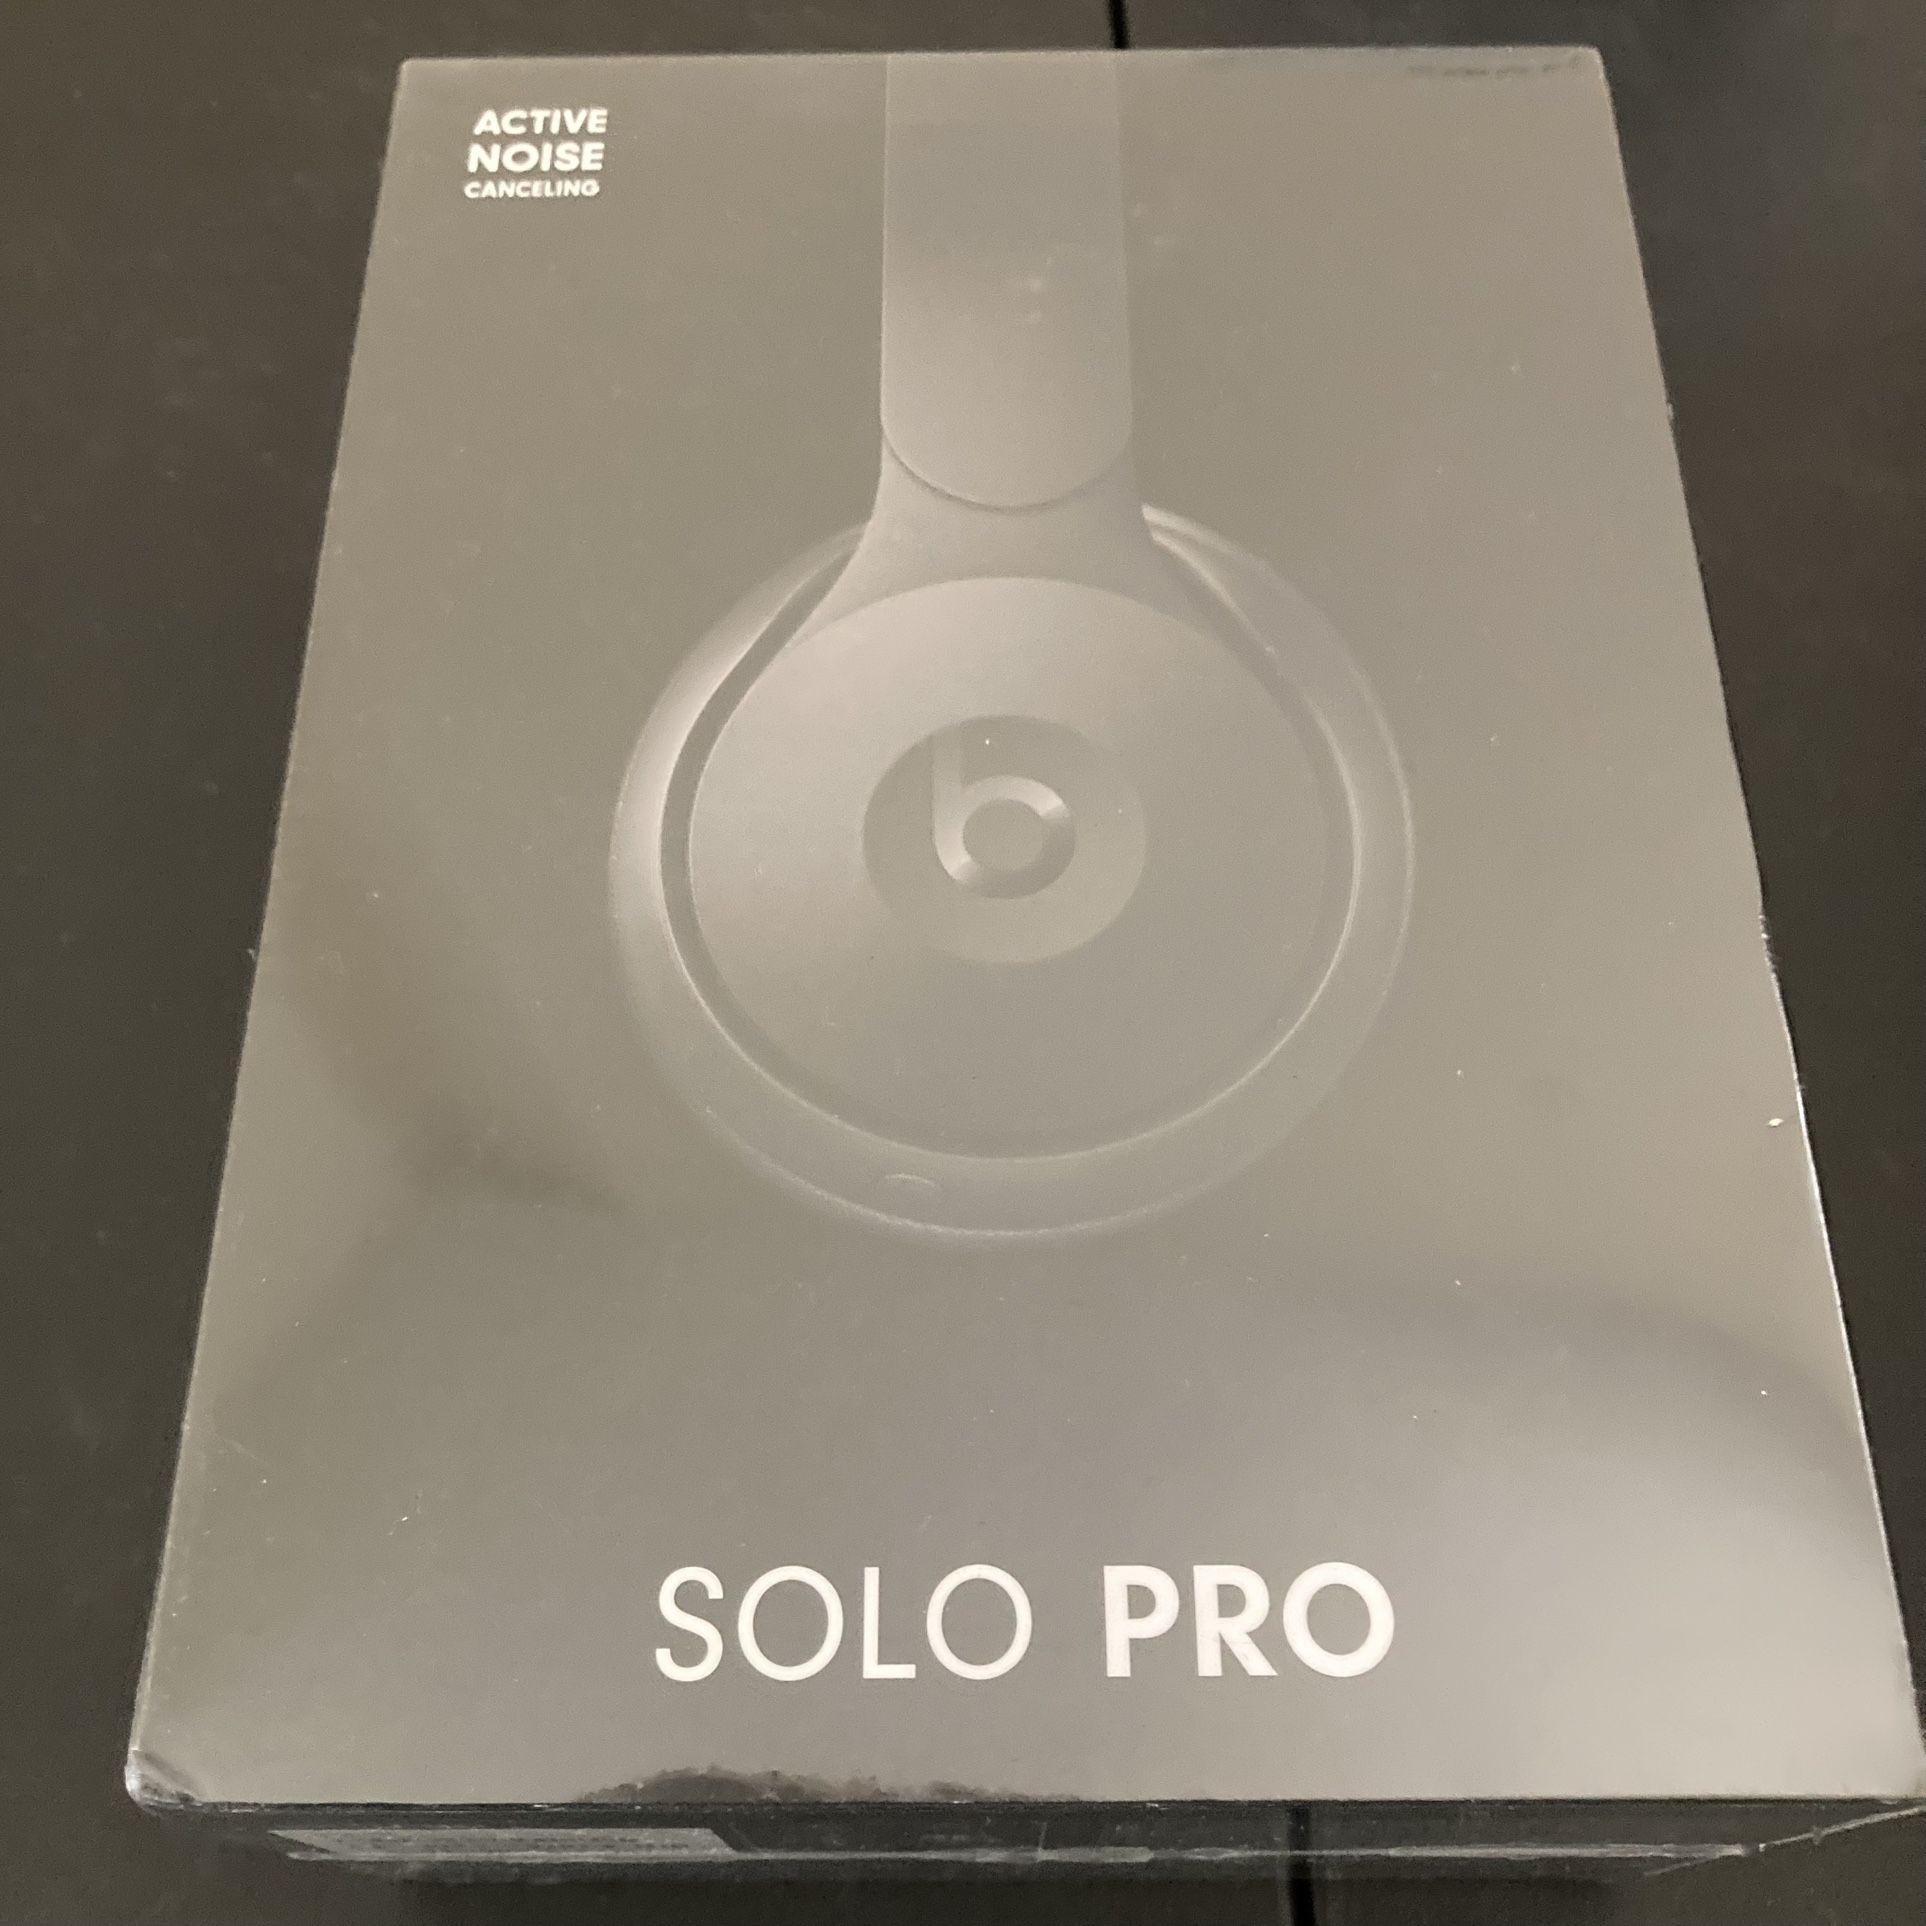 Beats Solo Pro Wireless Noise Canceling On Ear Headphones Apple H1 Chip Class 1 Bluetooth Built In Microphone 22 Hours Of Listening Time 